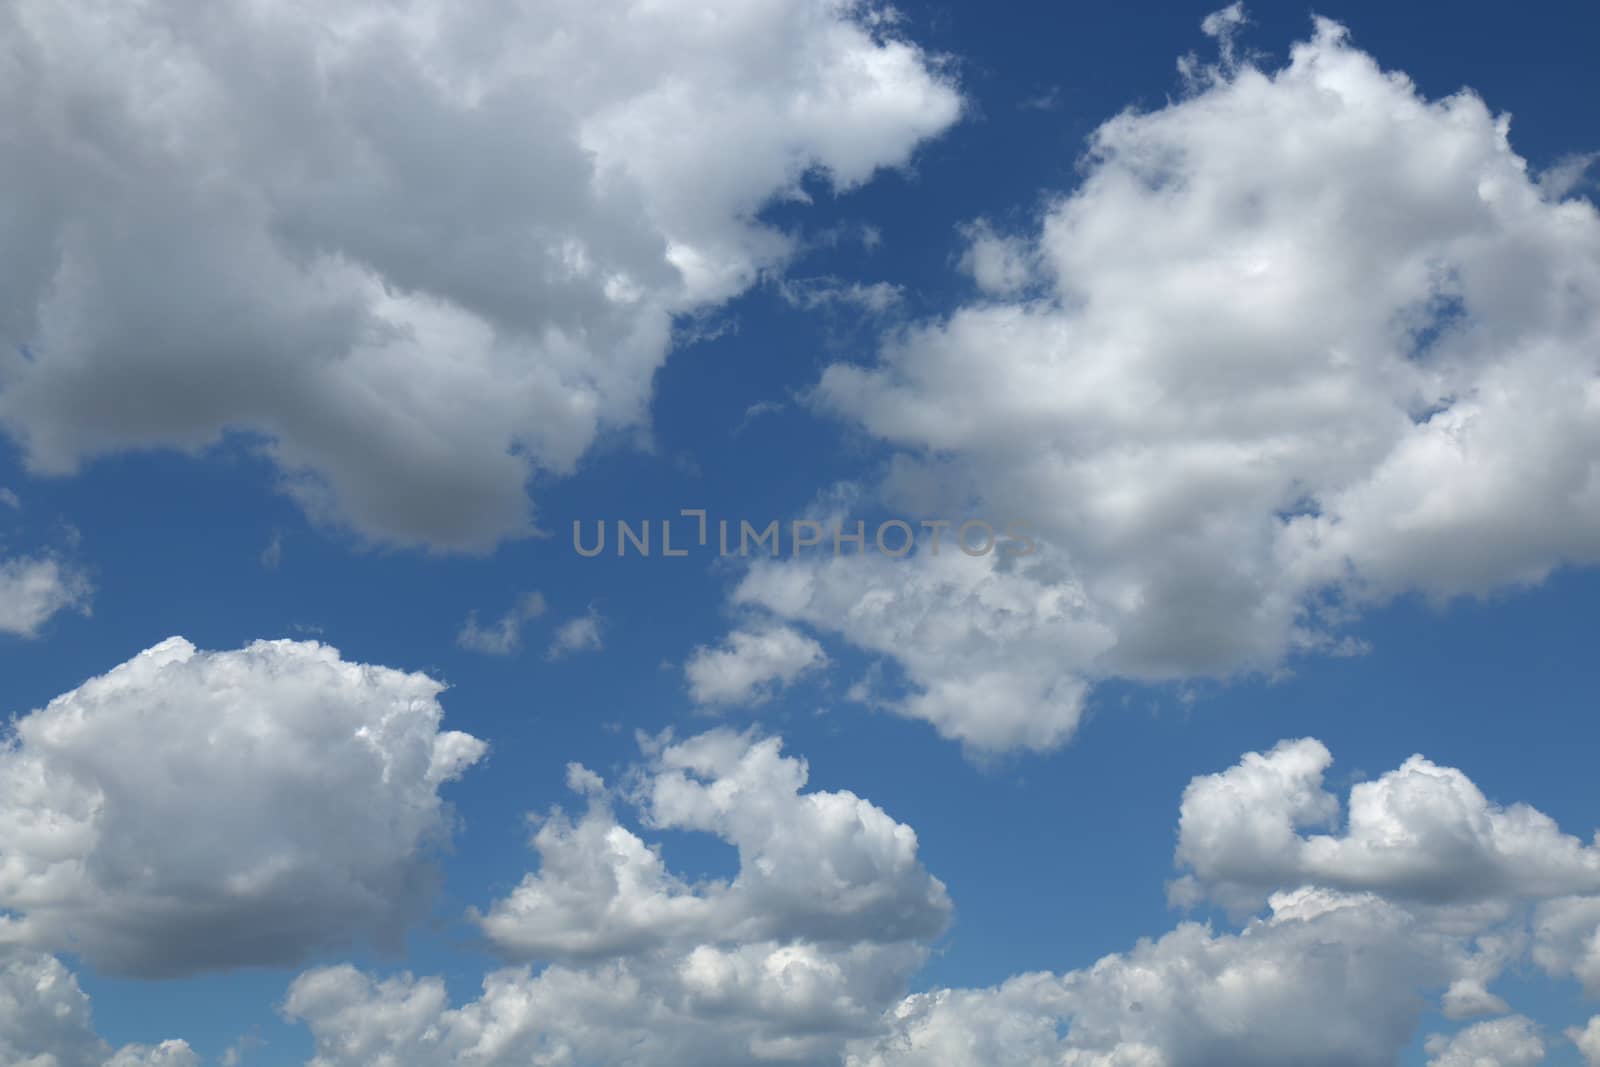 Blue sky with clouds background, sky with clouds